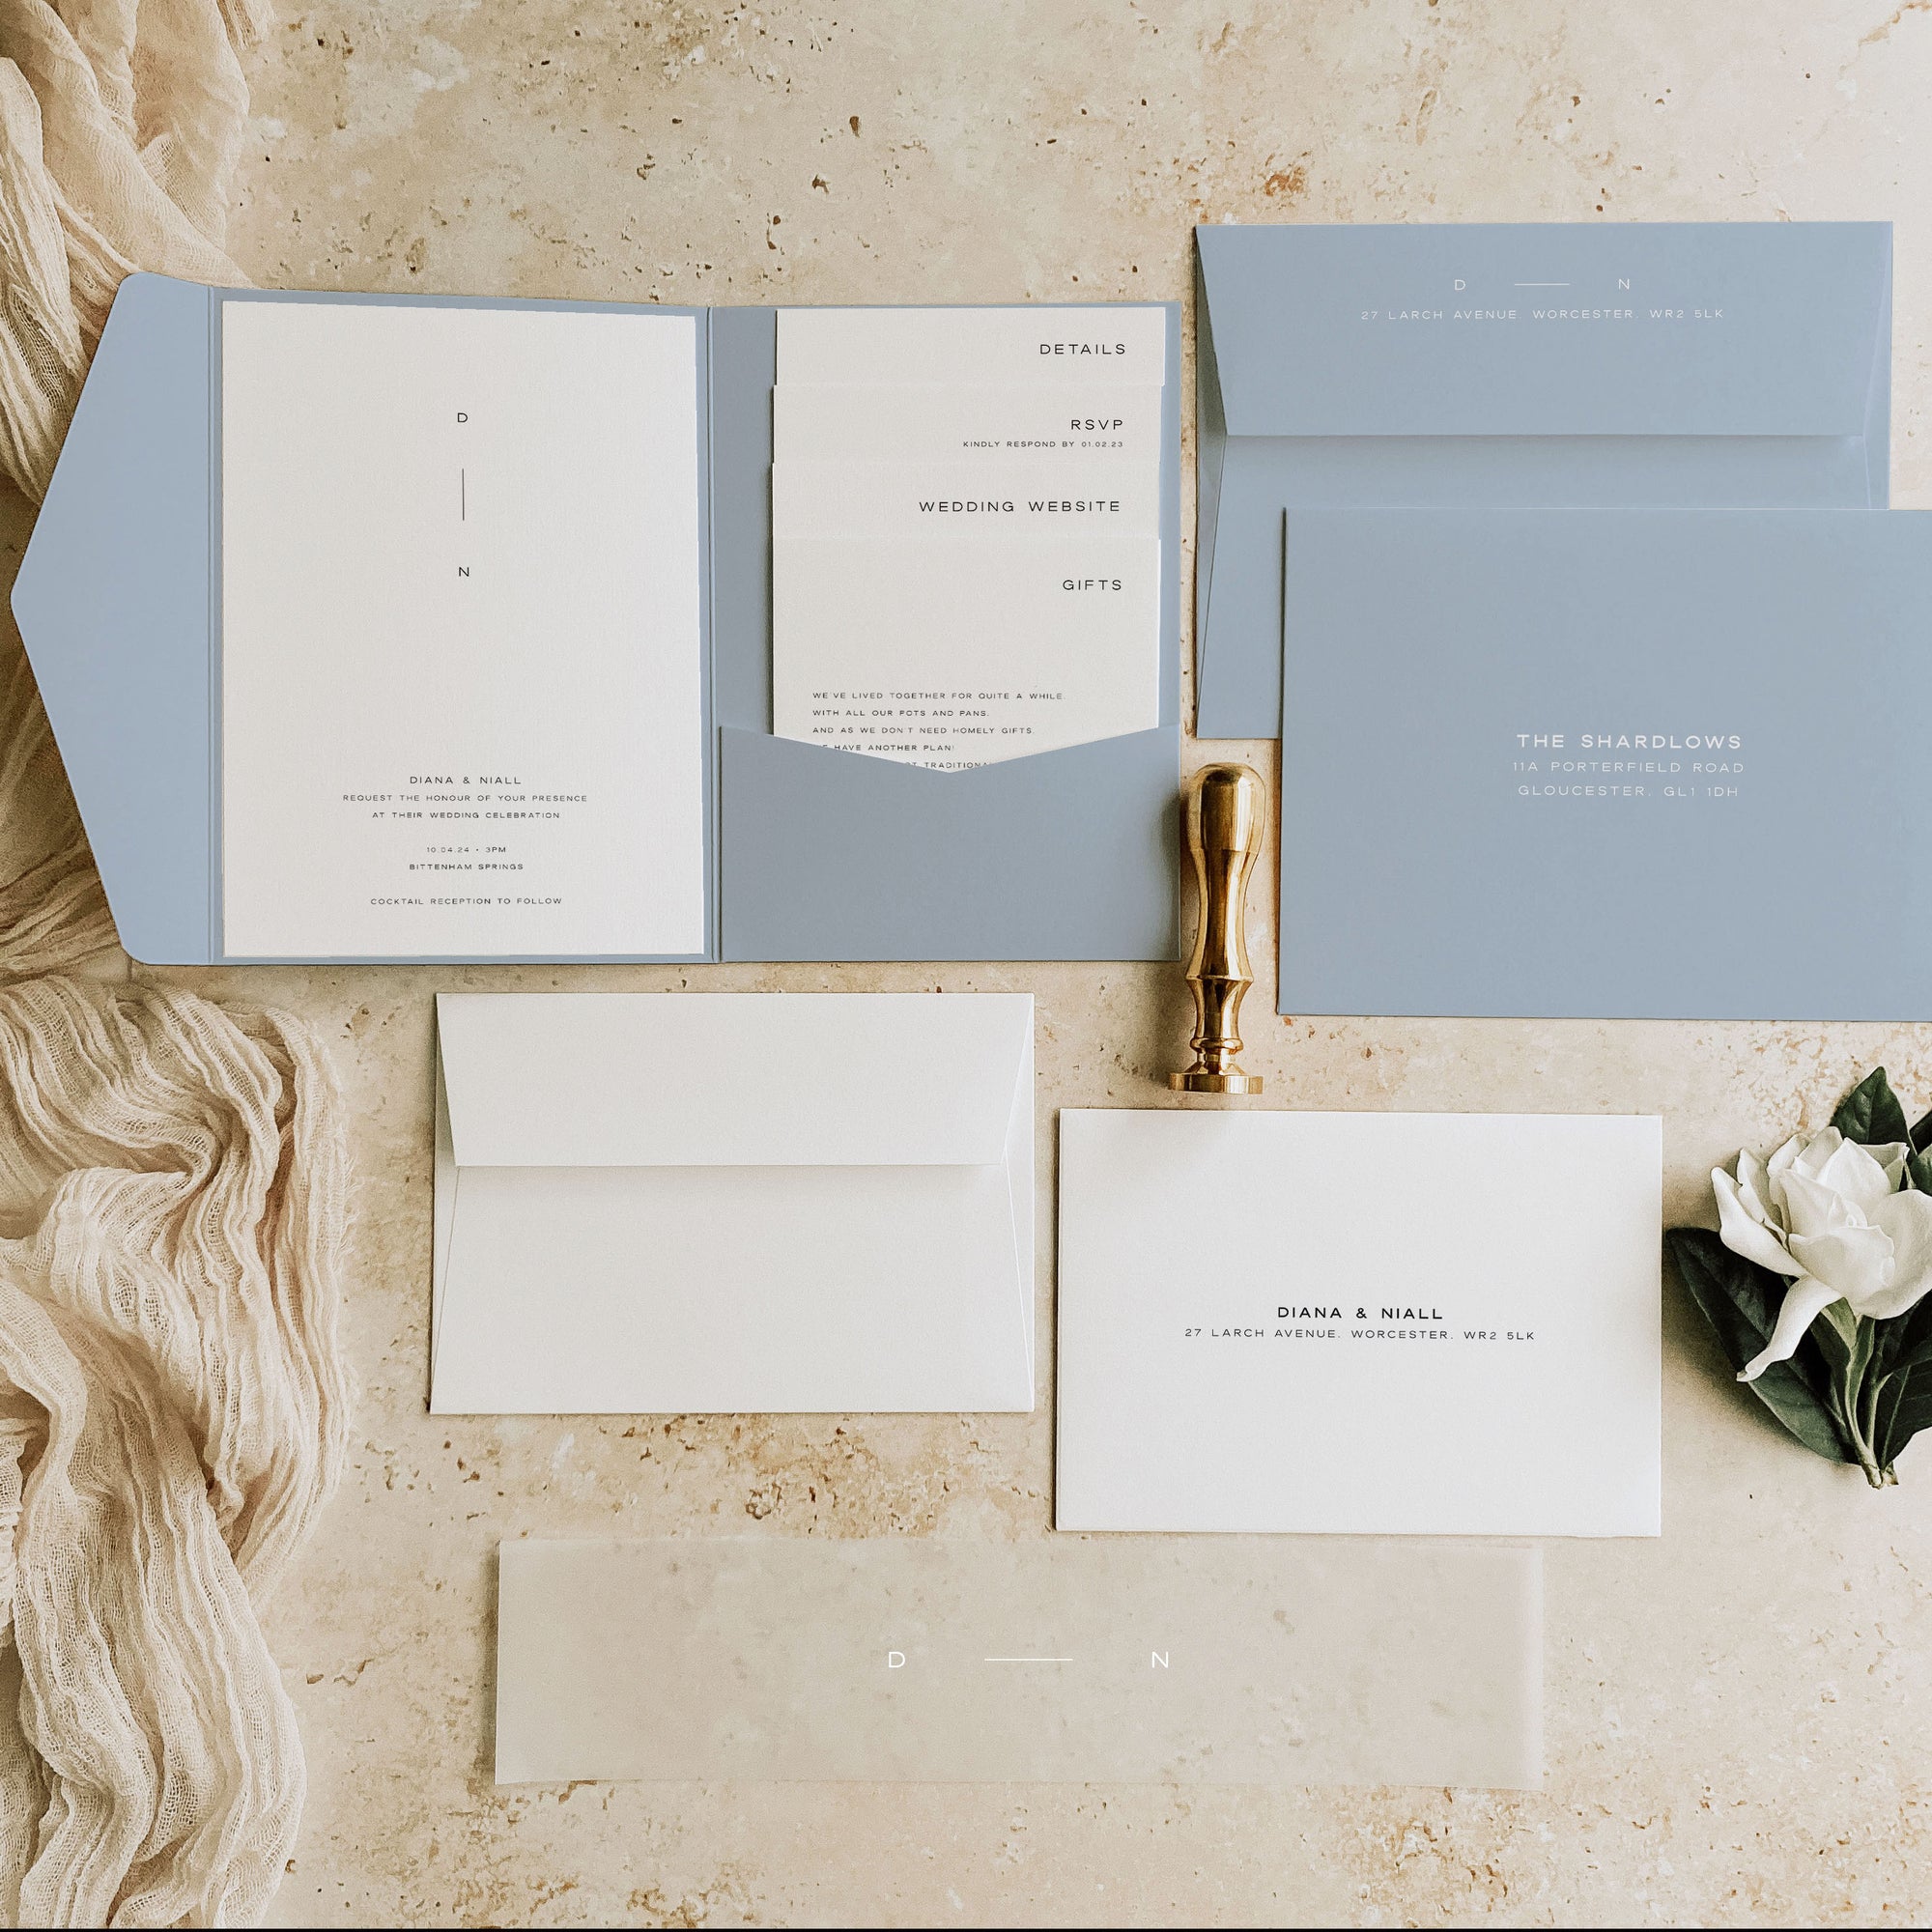 How to Assemble and Stuff Your Wedding Invitations